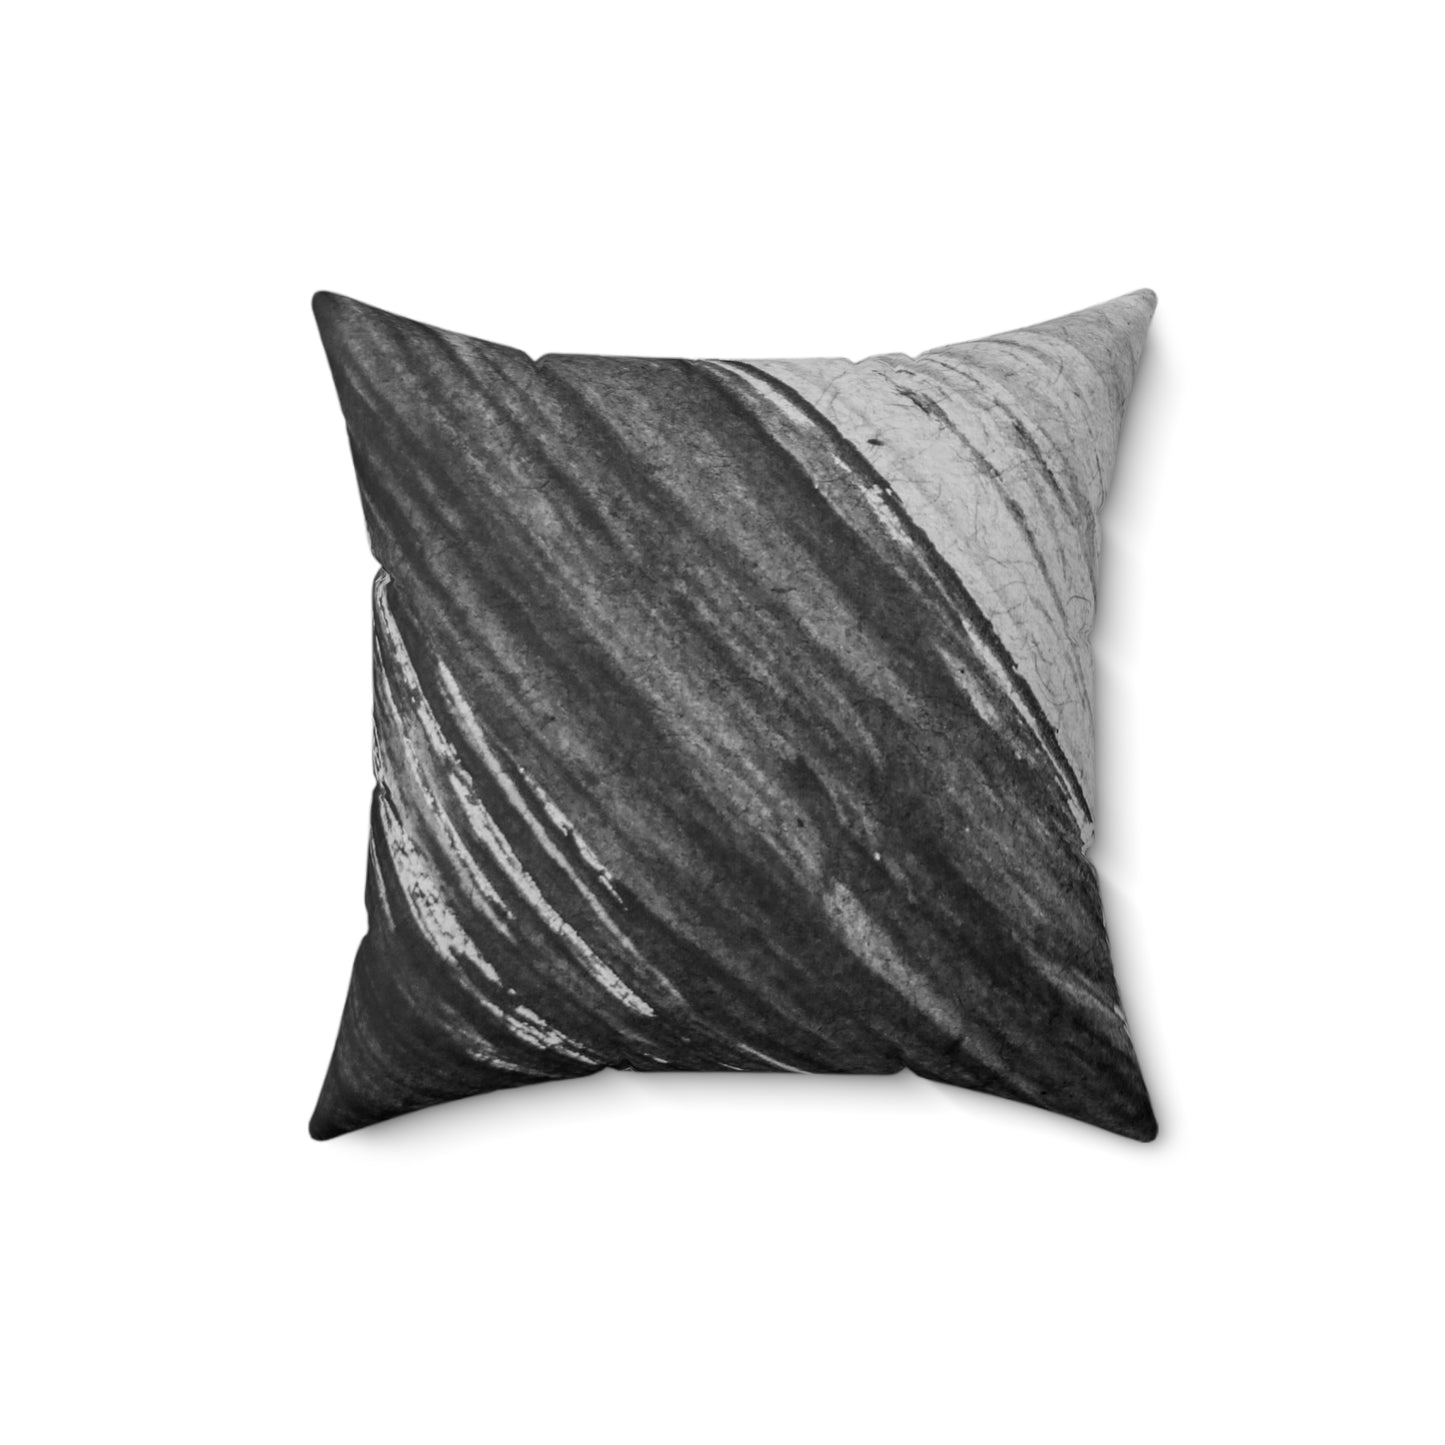 Gray and Black Paint Strokes Square Pillow